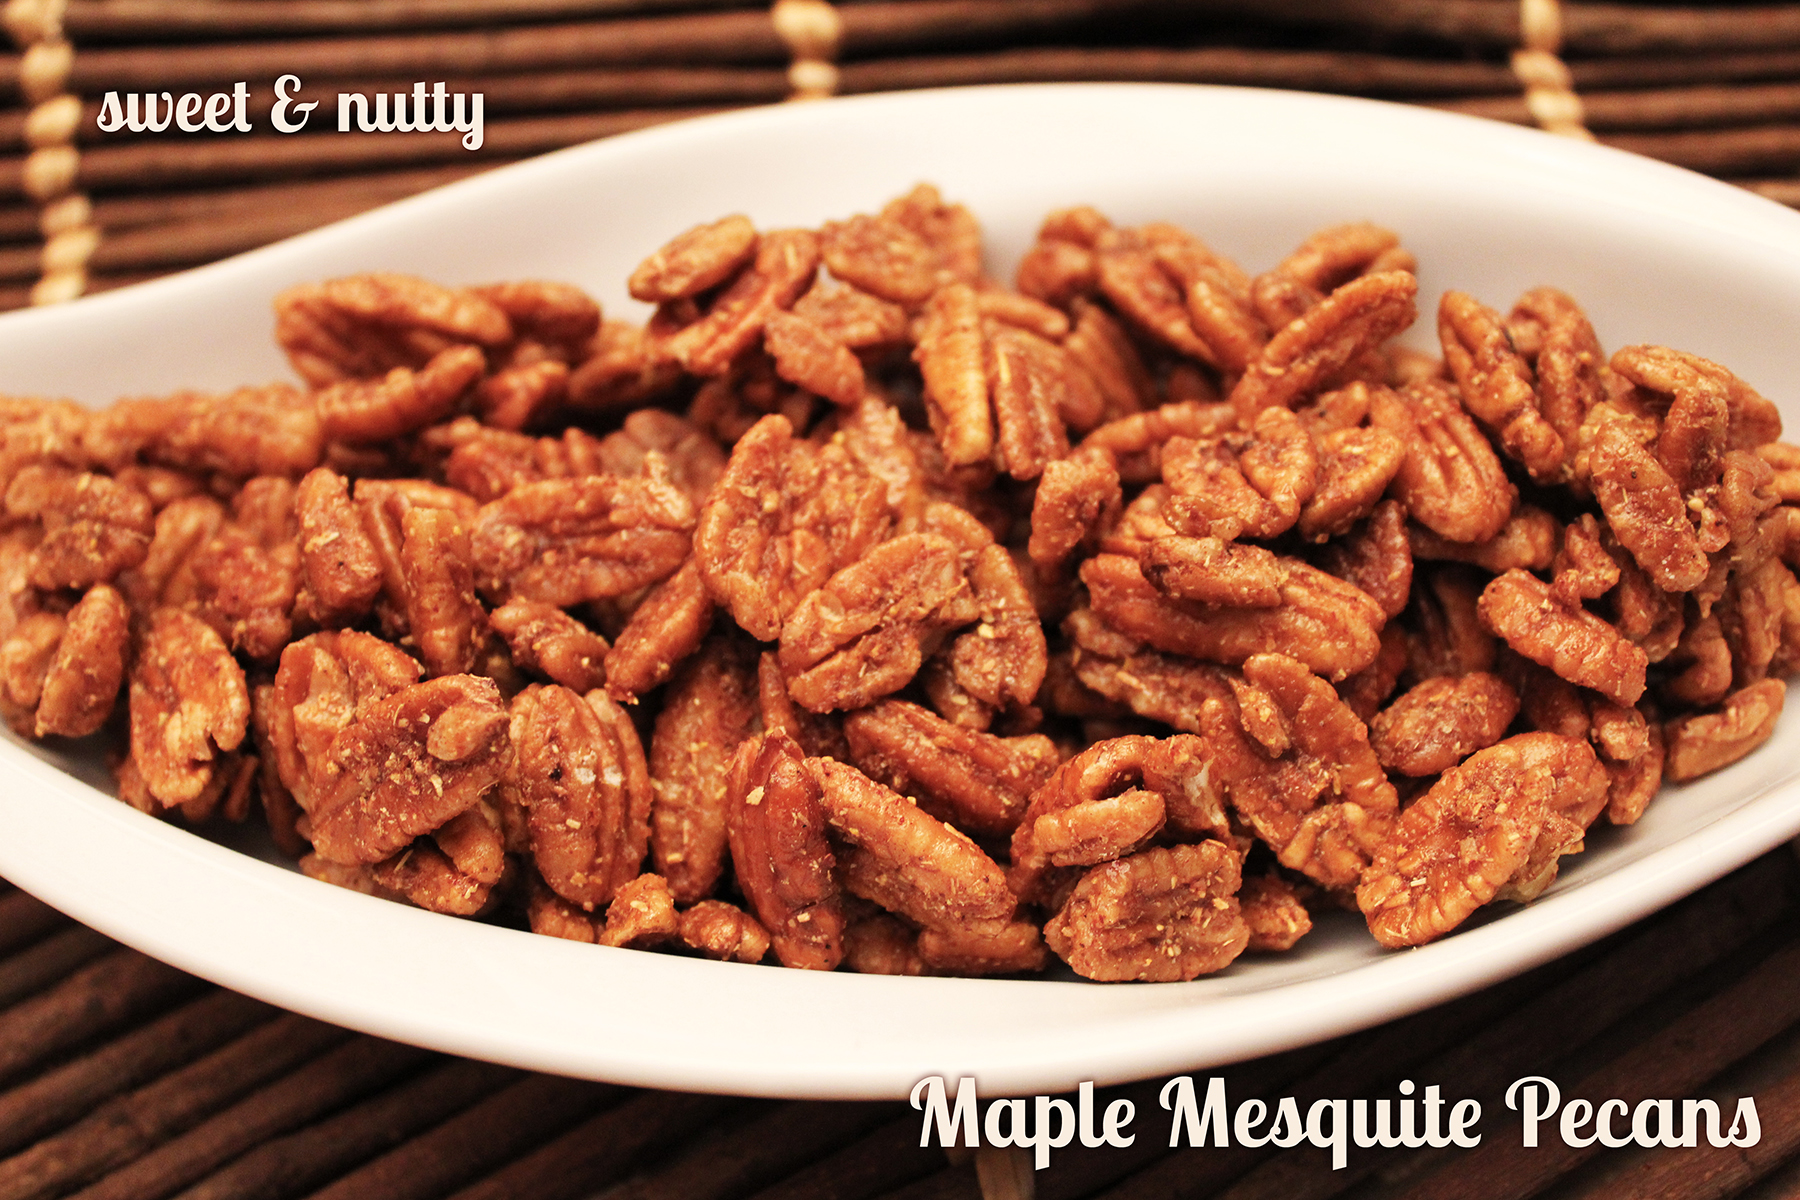 Kraze Foods Maple Mesquite Pecans are sweet and nutty